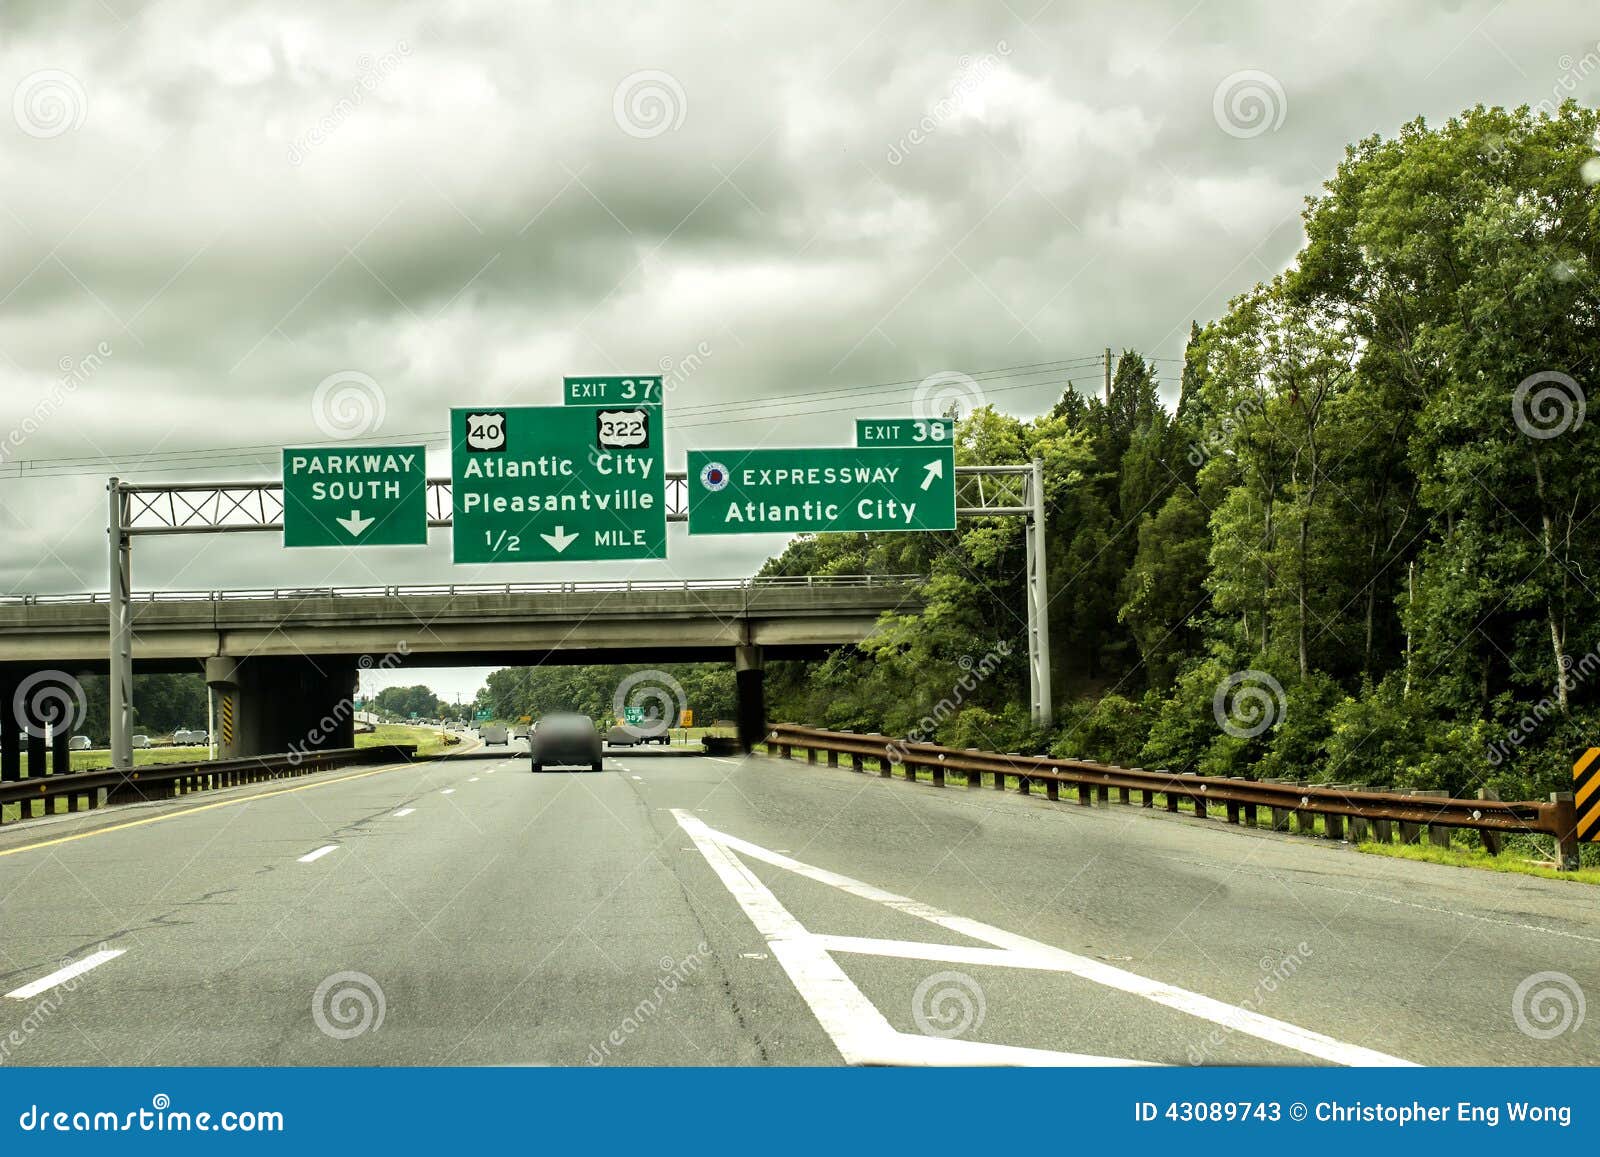 Exit To Atlantic City Stock Image Image Of Trees Road 43089743